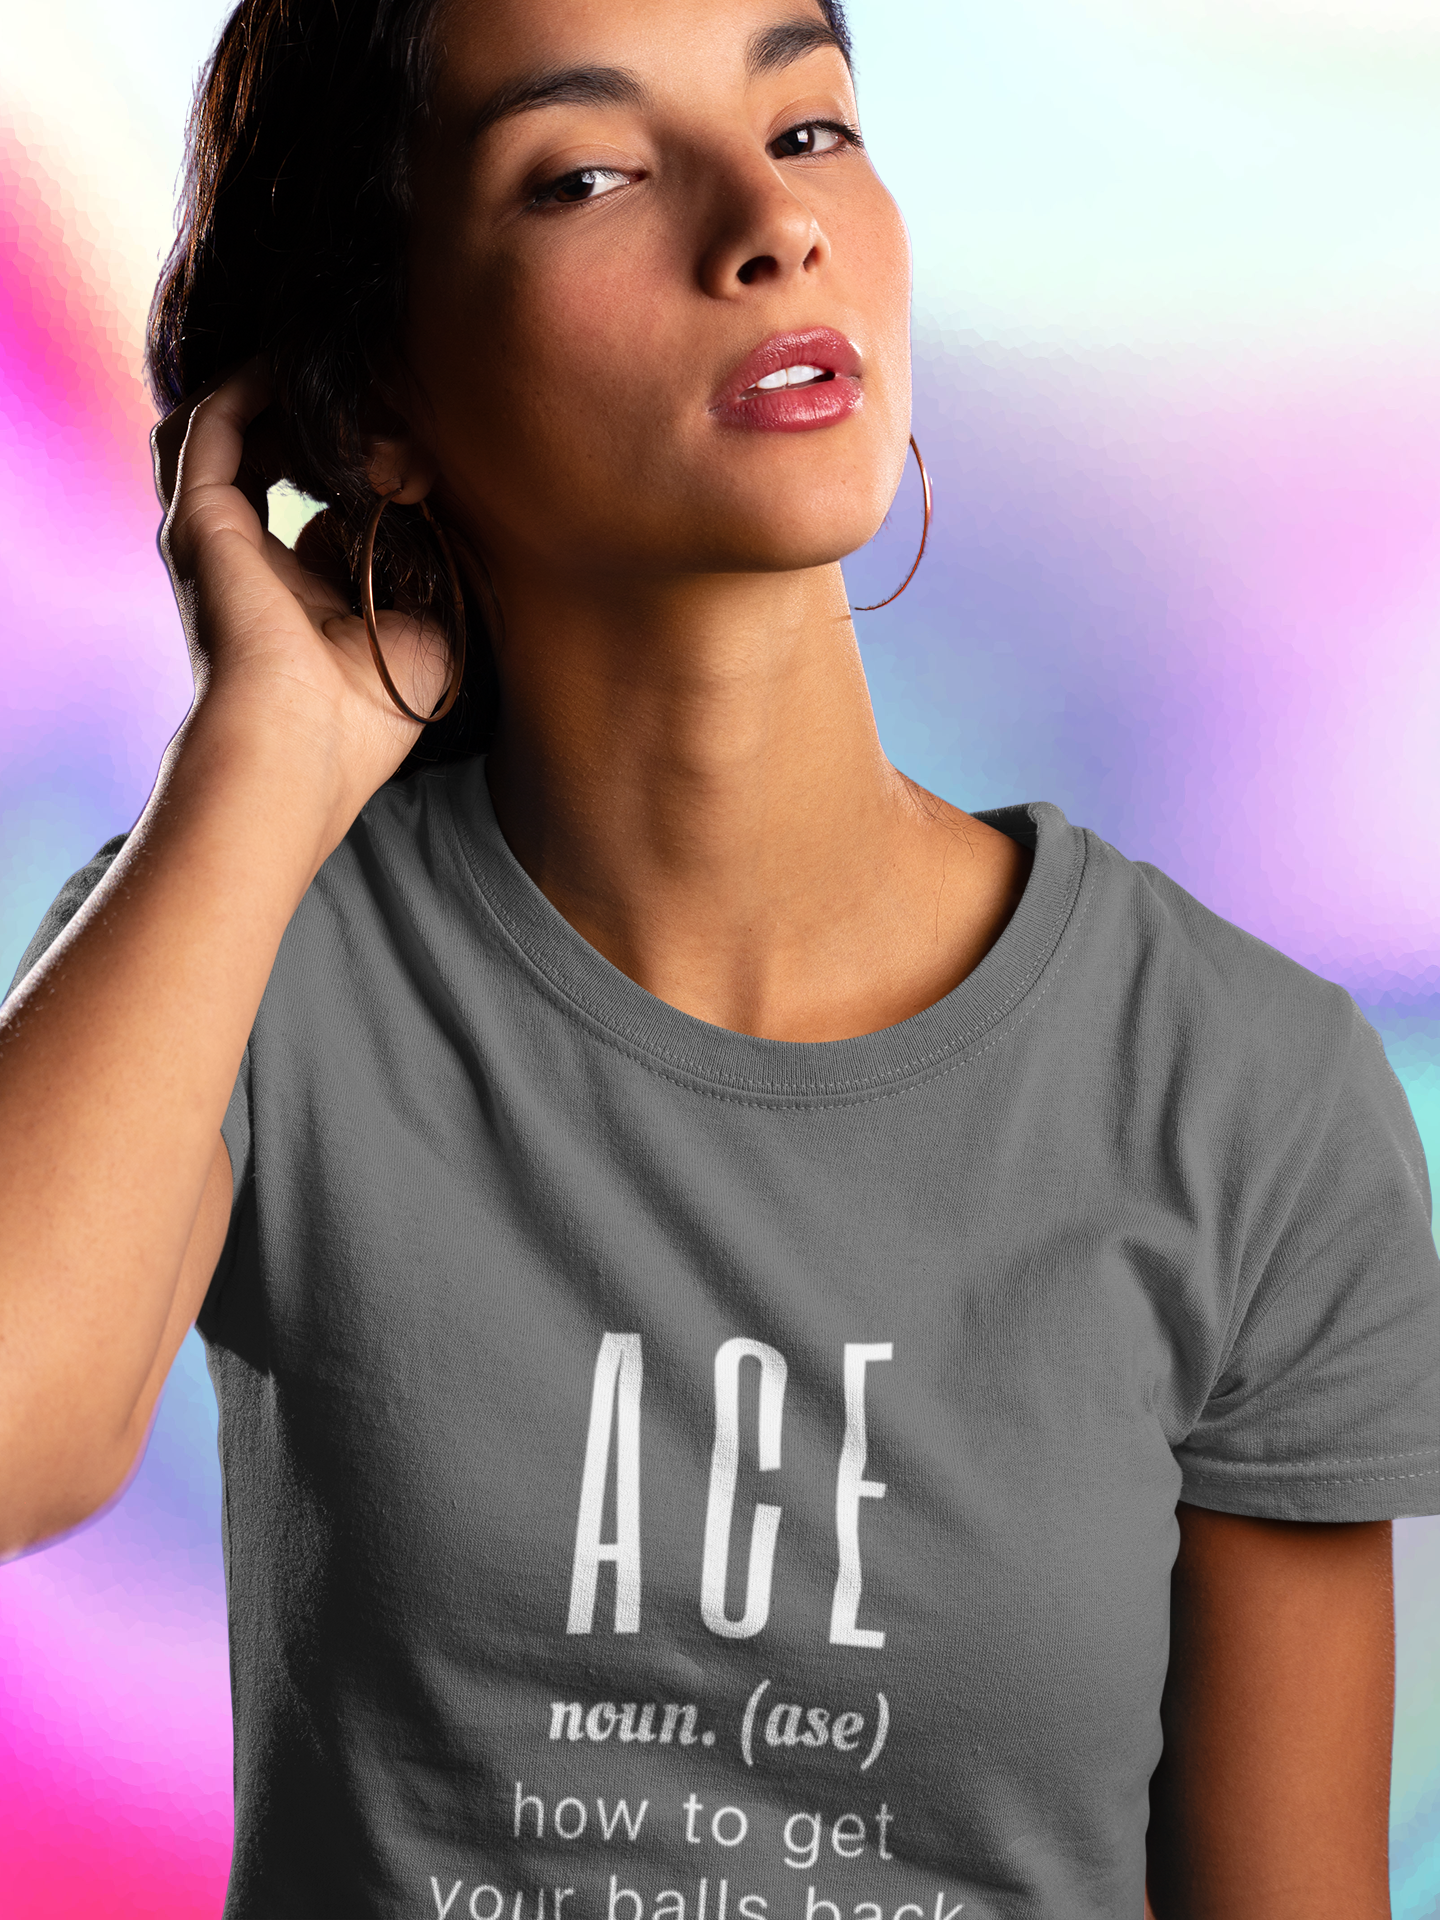 This really cute ACE Volleybragswag shirt is one of my original designs in my volleyball balls shirt collection available in my ETSY shop.